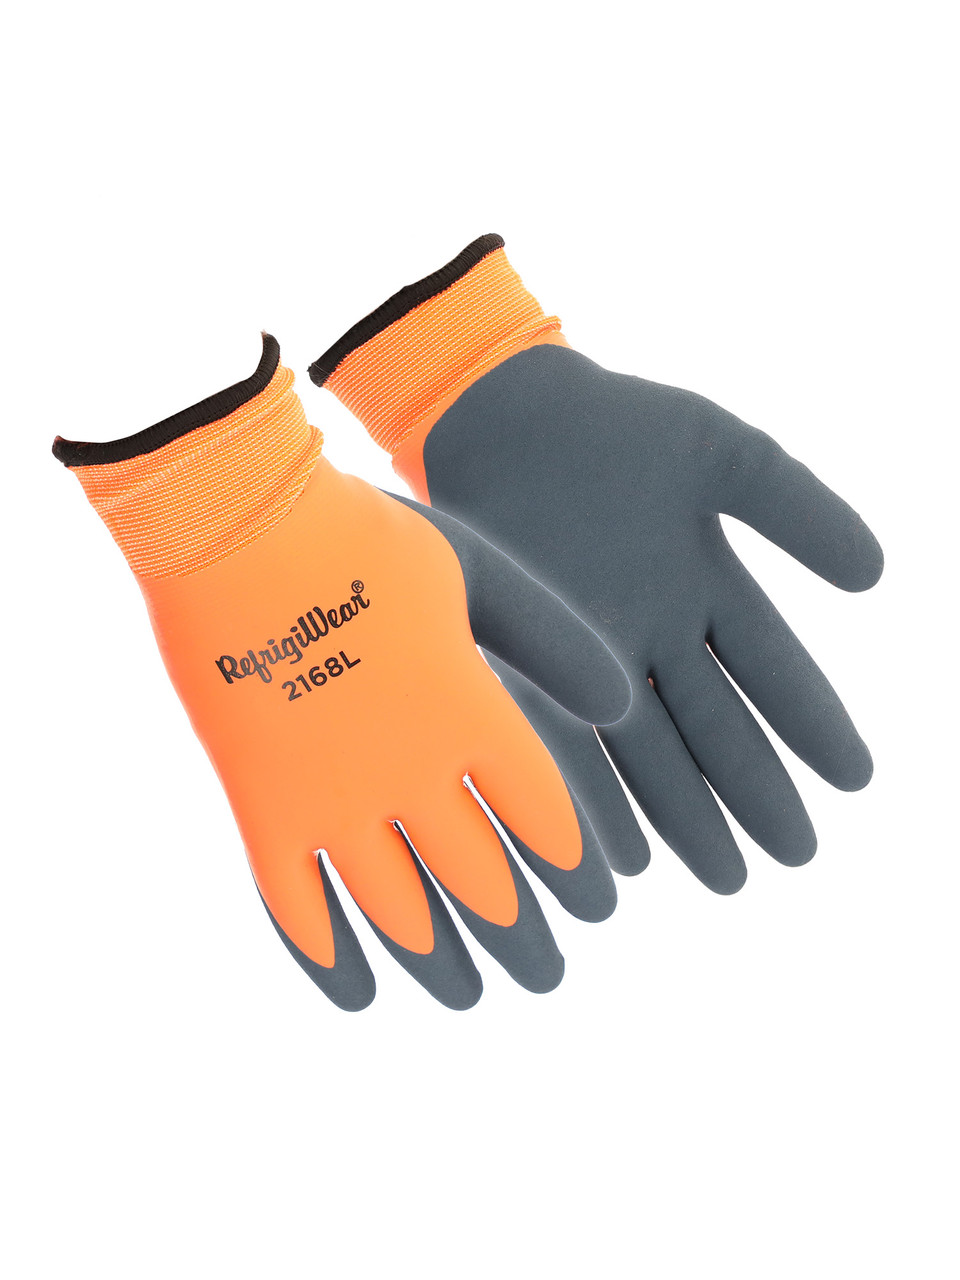 https://cdn11.bigcommerce.com/s-2o3gsghf8c/images/stencil/1280x1280/products/1505/3302/2168_Gloves__03114.1661195350.jpg?c=1